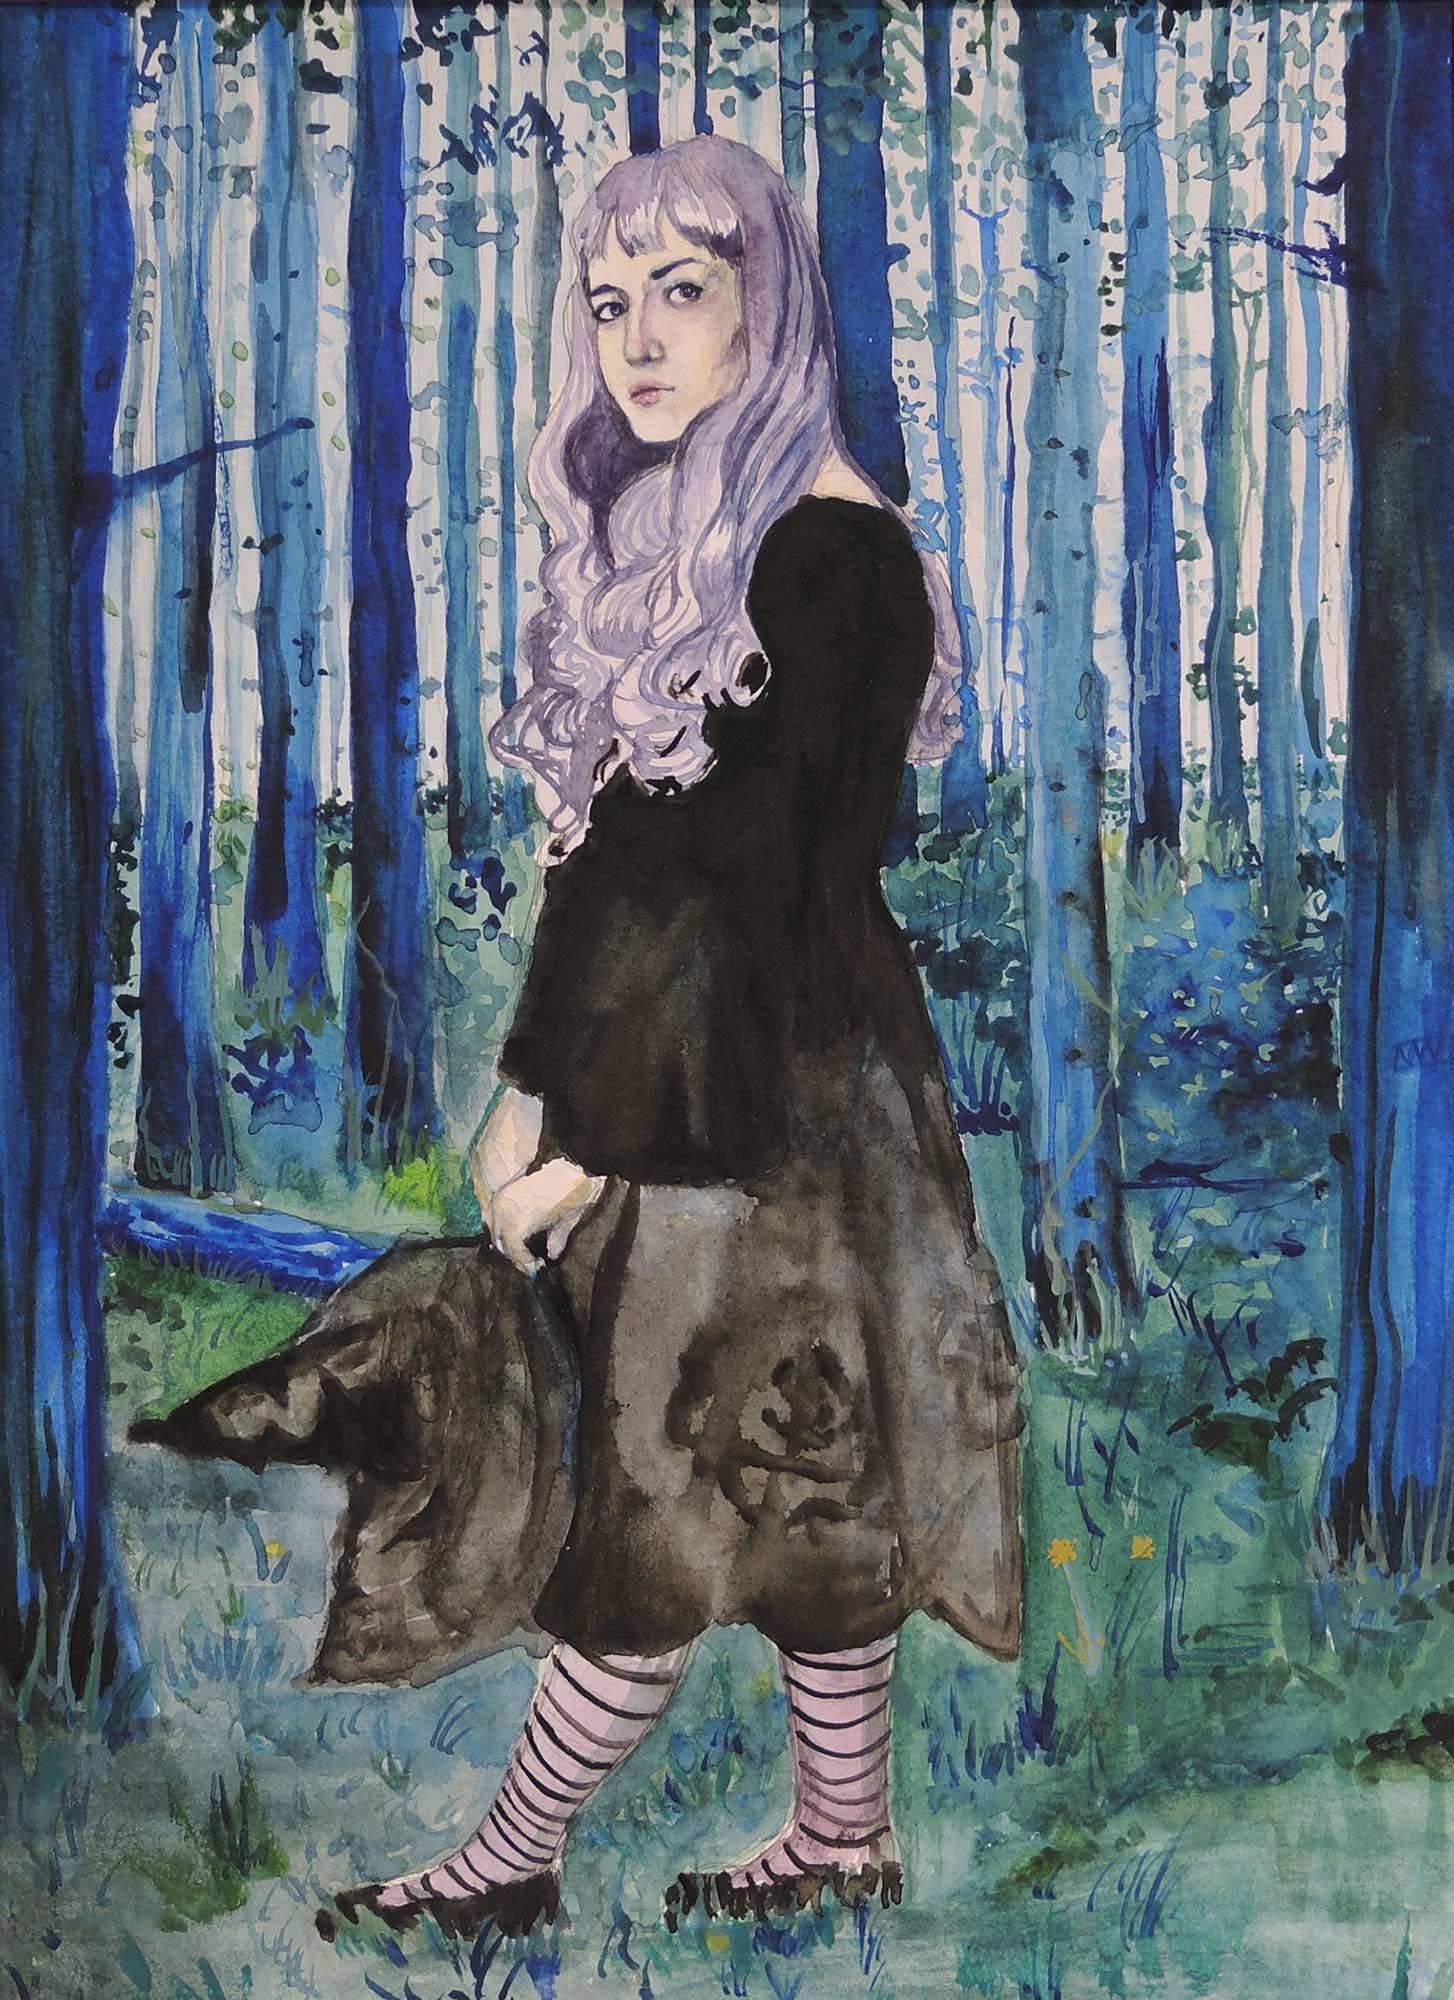 A painting by Nina Vazquez of a young woman in a forest